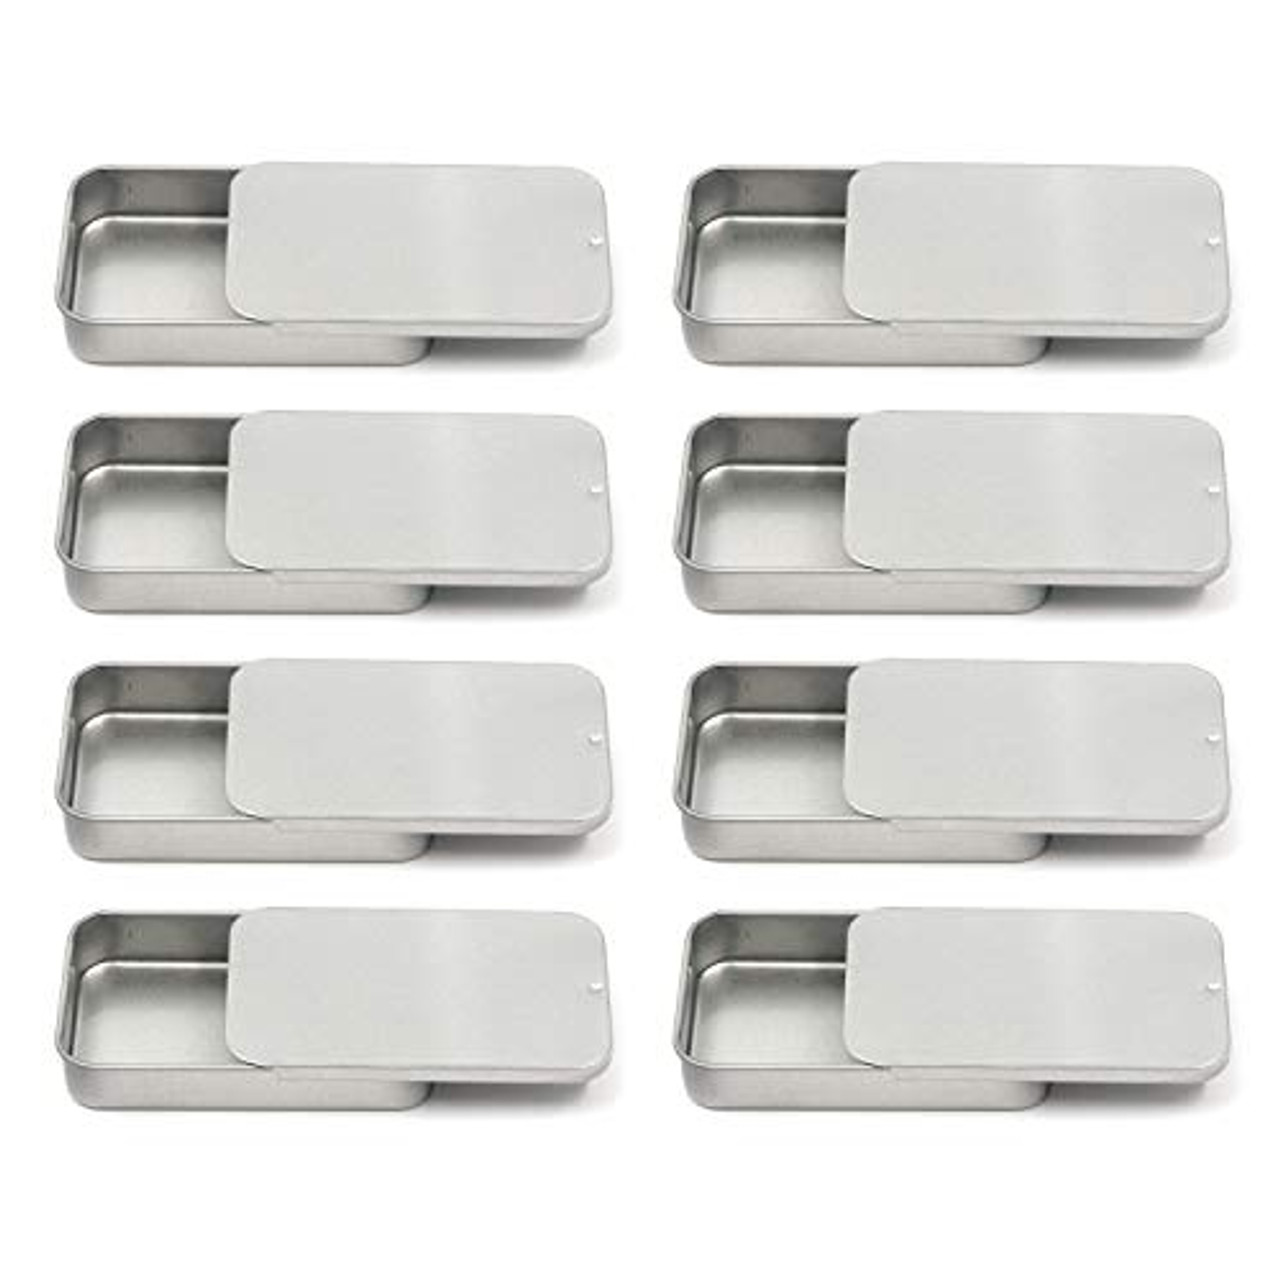 Mironey 3.1 x 2 x 0.6 Metal Slide Top Tin Containers for Candies Jewelry  Crafts Pills Survival Kit Pack of 8